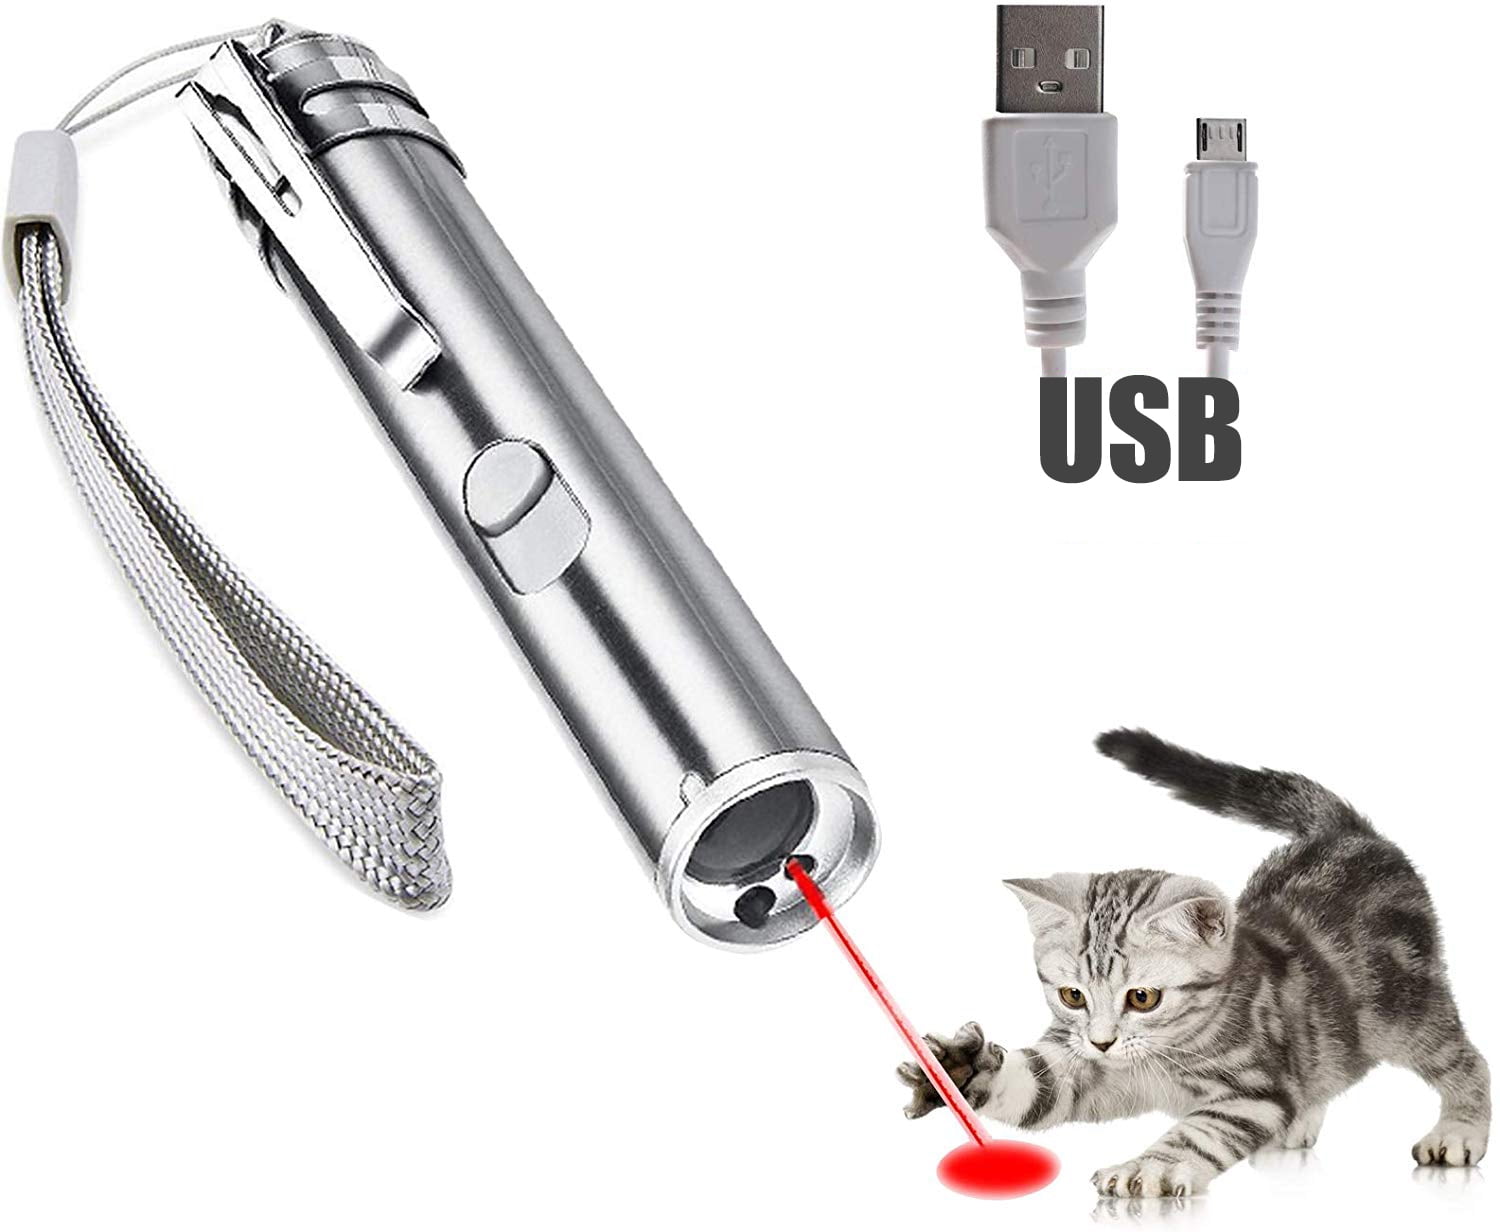 600Miles Green Laser Pointer Pen 532nm Visible Beam Light AAA Lazer Pet Cat Toy 